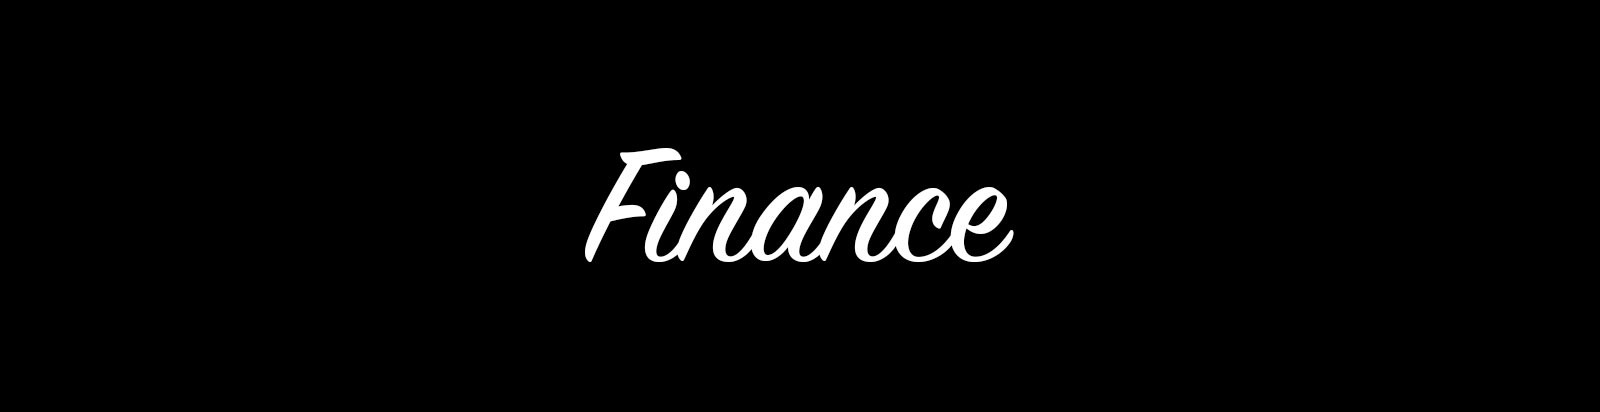 Finance — Investments, Stocks, Transfers, and more